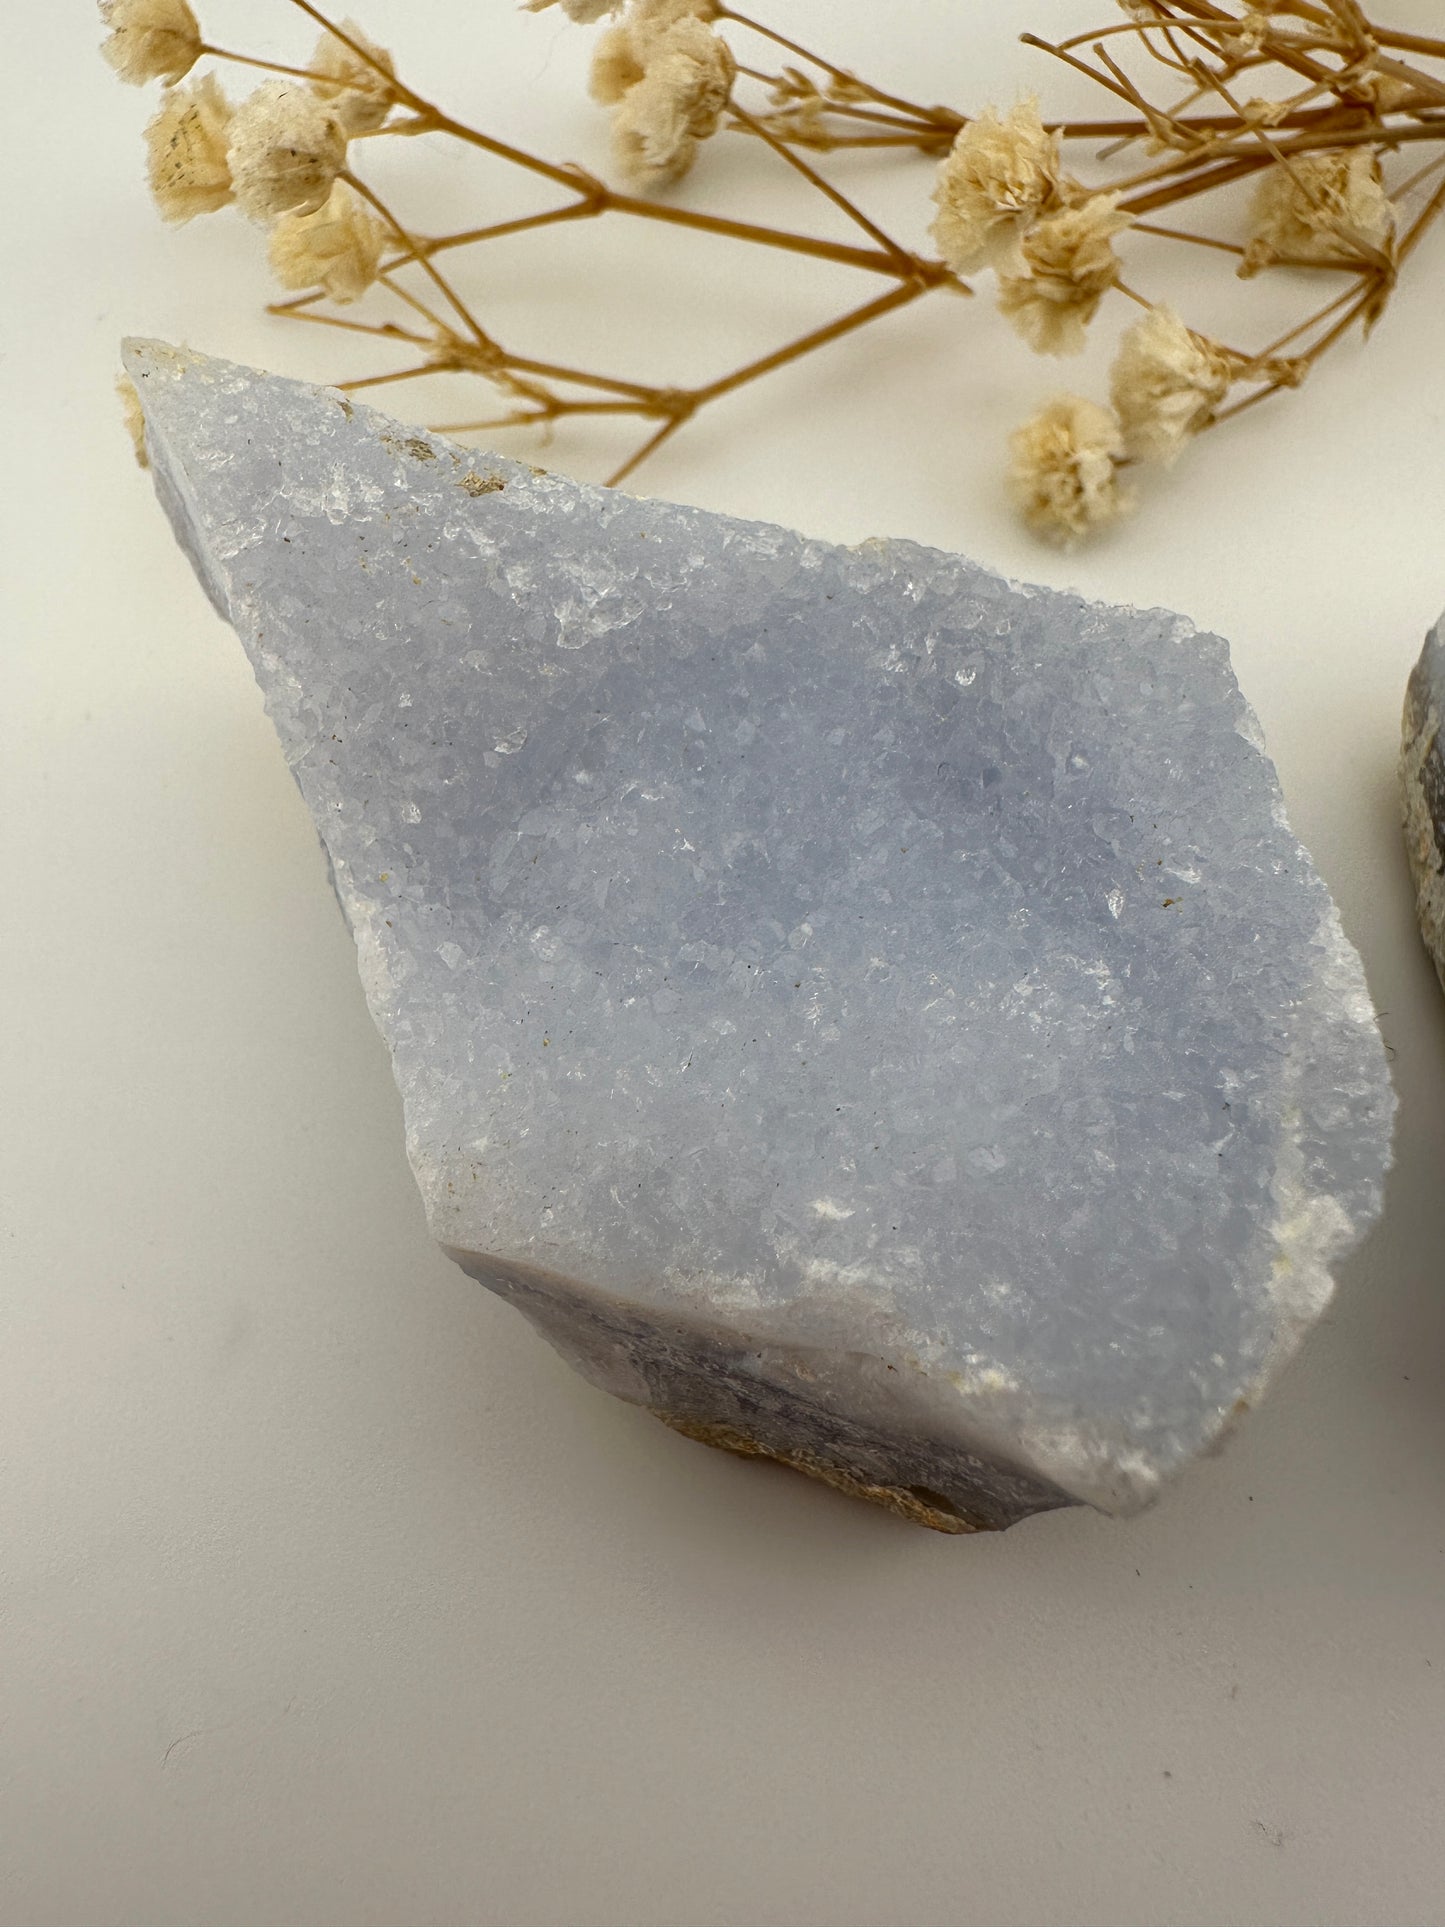 Raw blue lace agate chunks with druzy